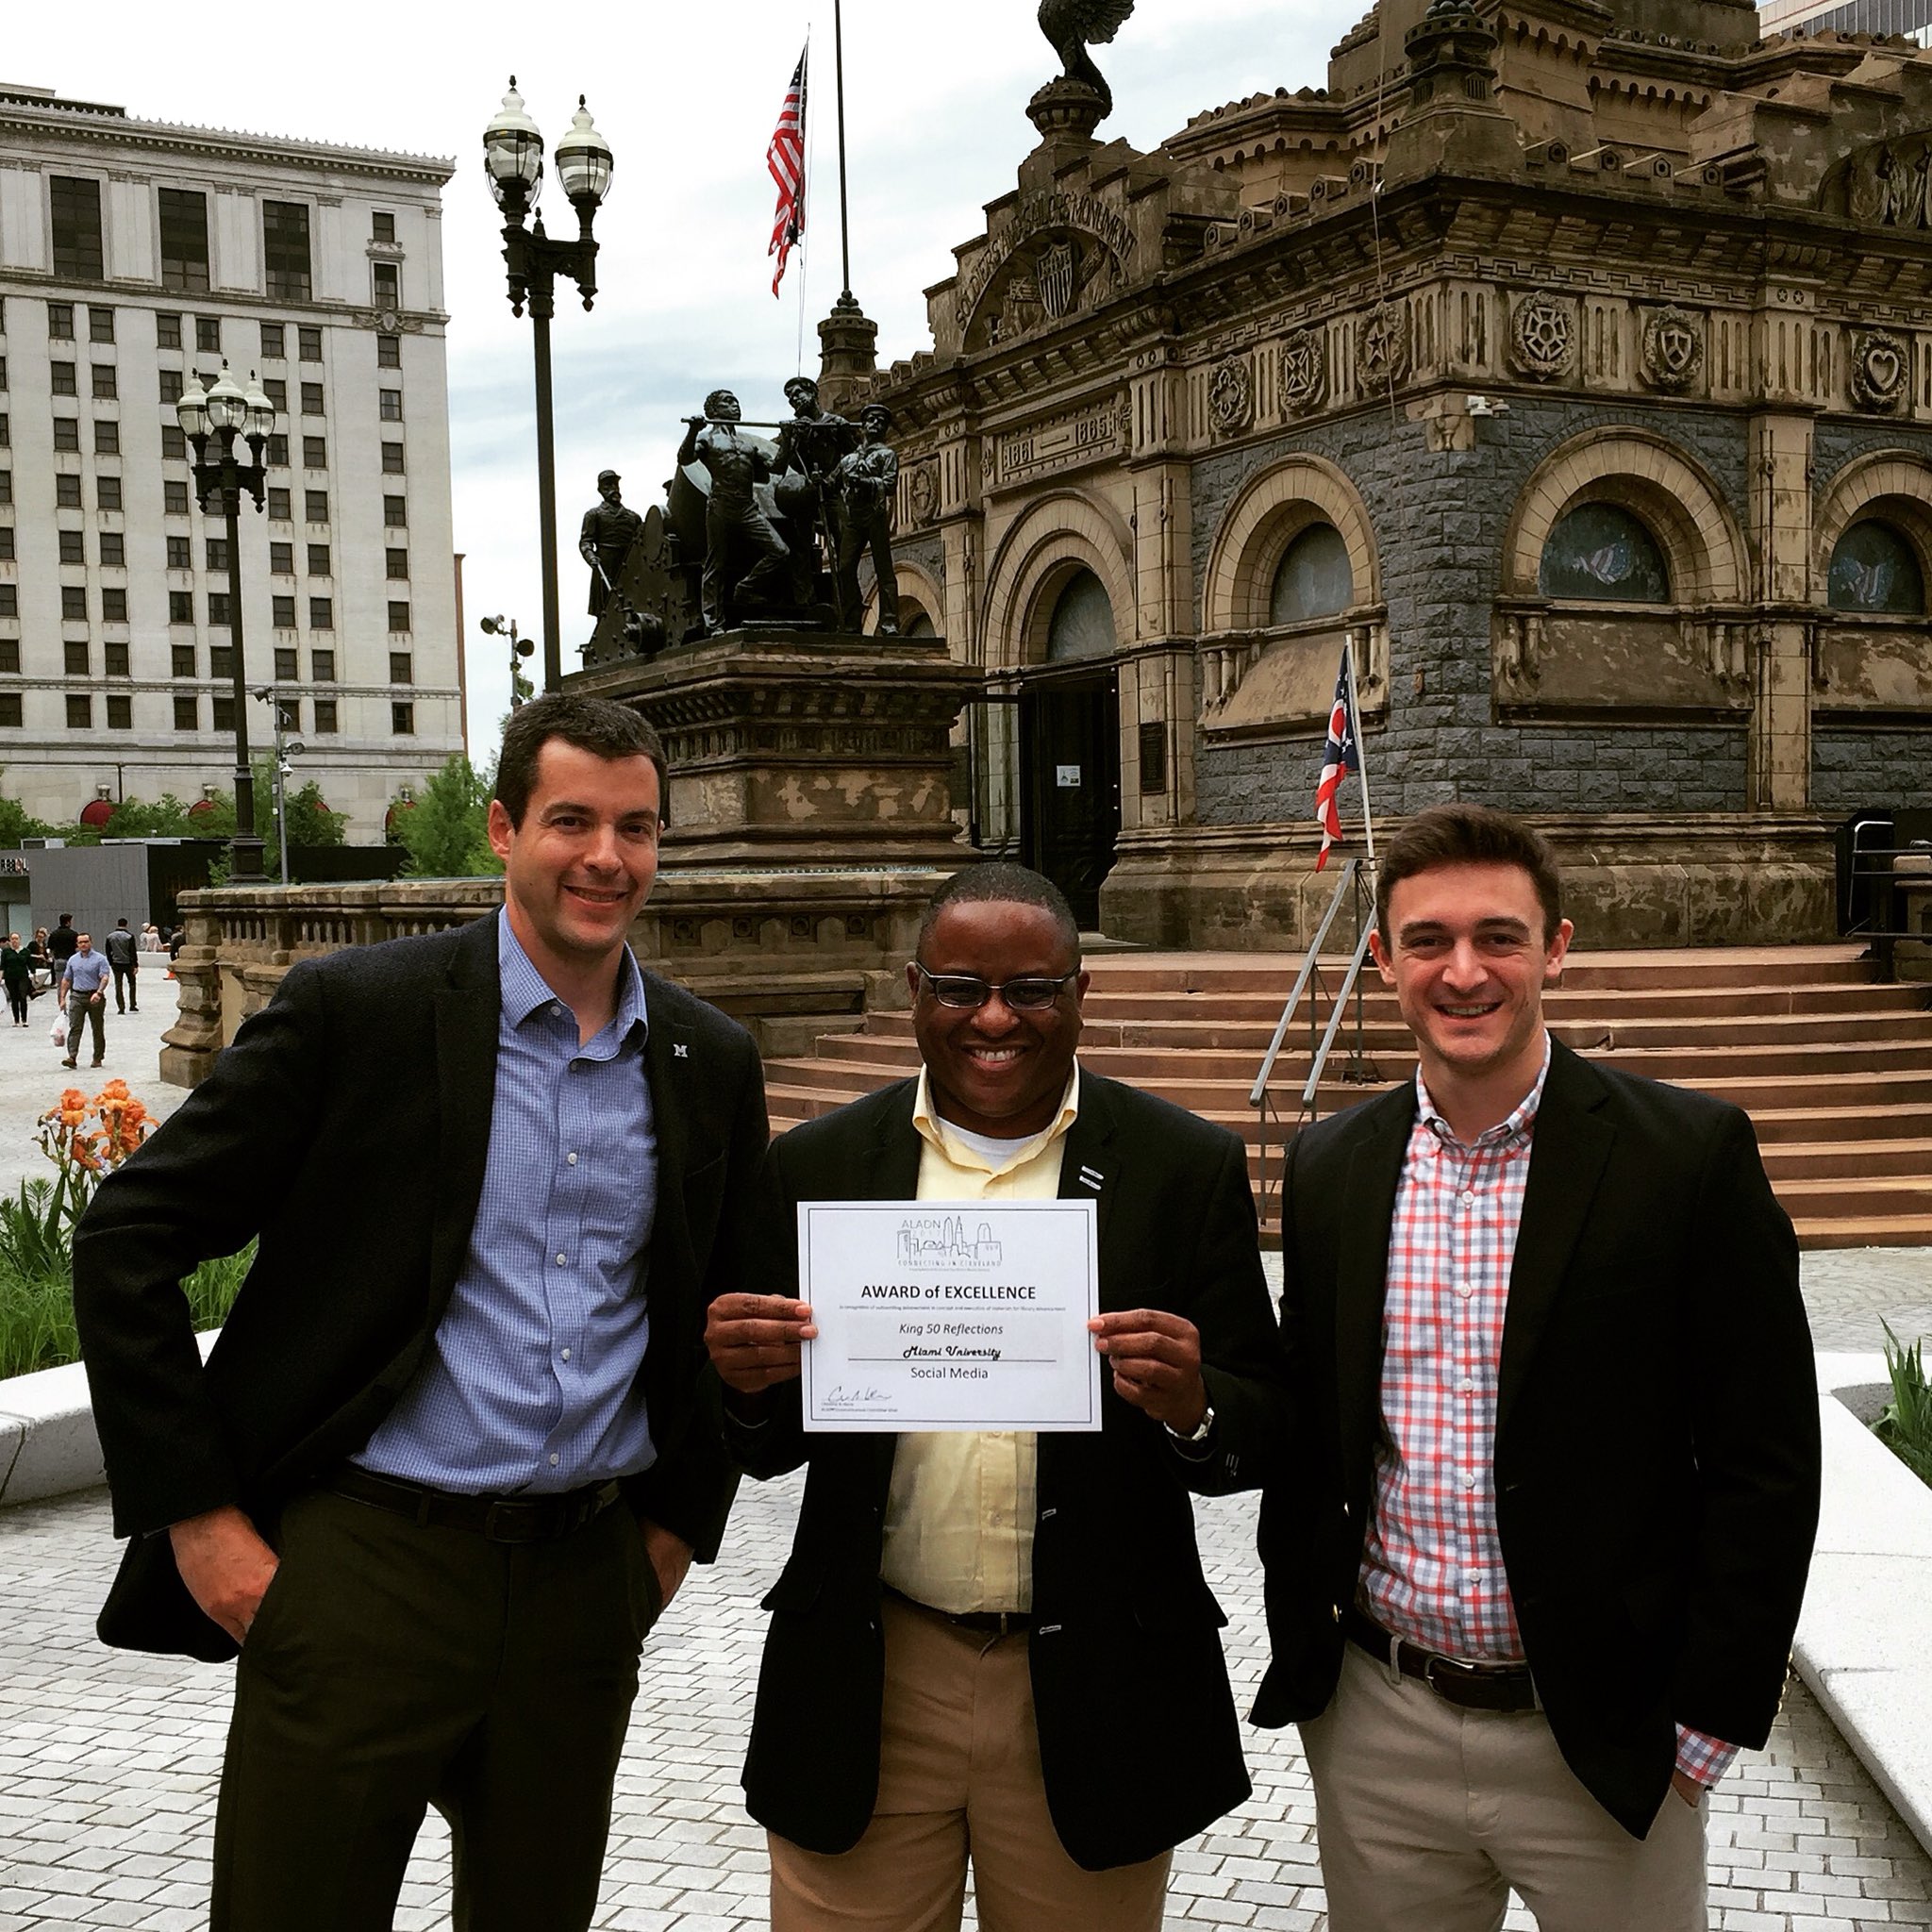 Vince Frieden, Jerome Conley, and David Mulford holding an Award of Excellence recognizing the 'King 50 Reflections'